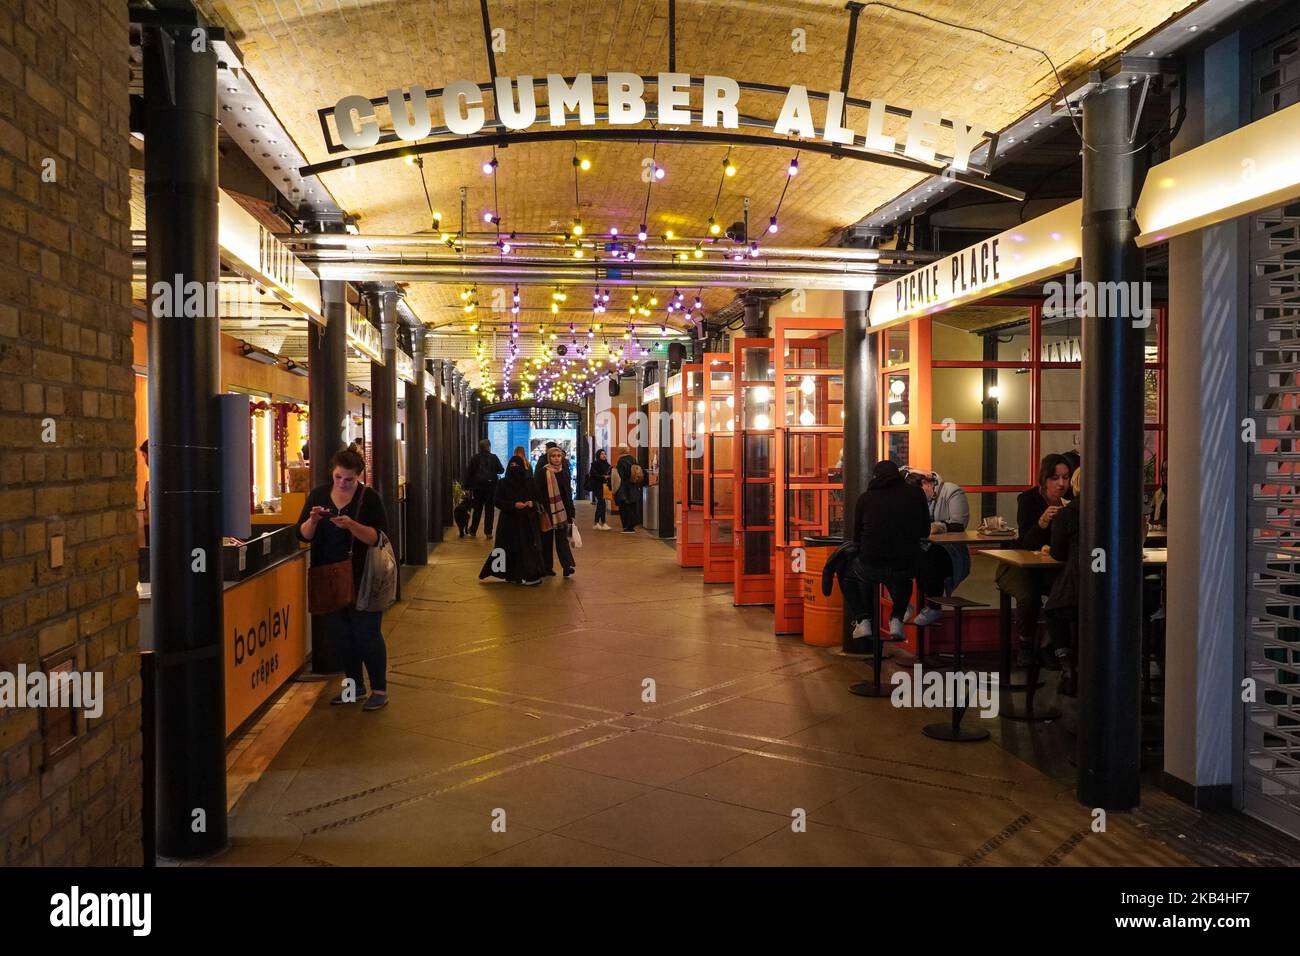 Cucumber Alley food court in Thomas Neals Centre, London England United Kingdom UK Stock Photo